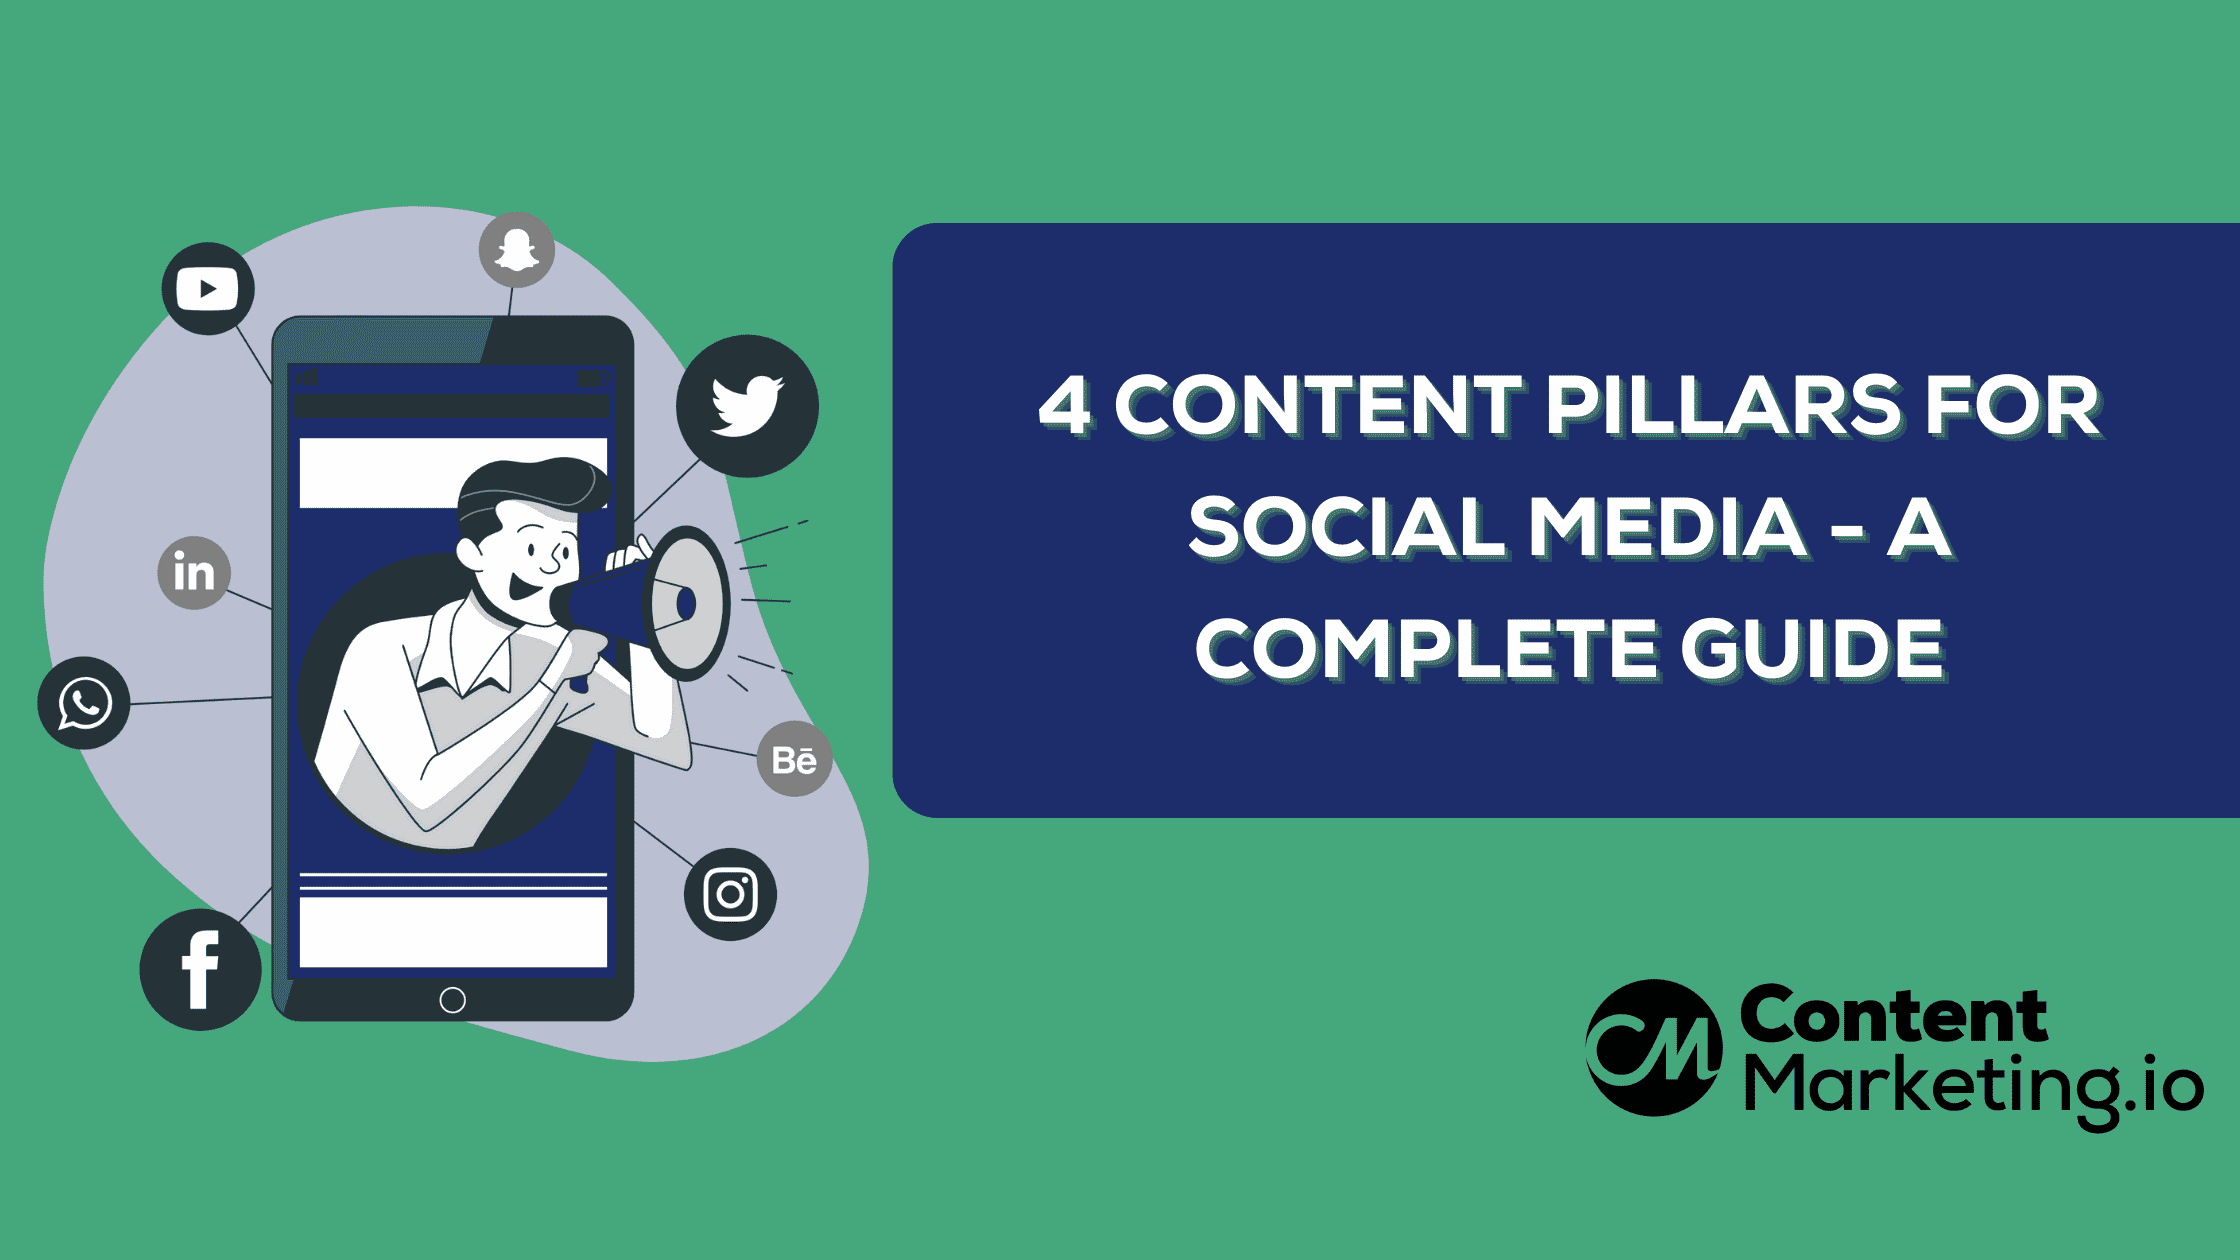 4 Content Pillars for Social Media - A Complete Guide